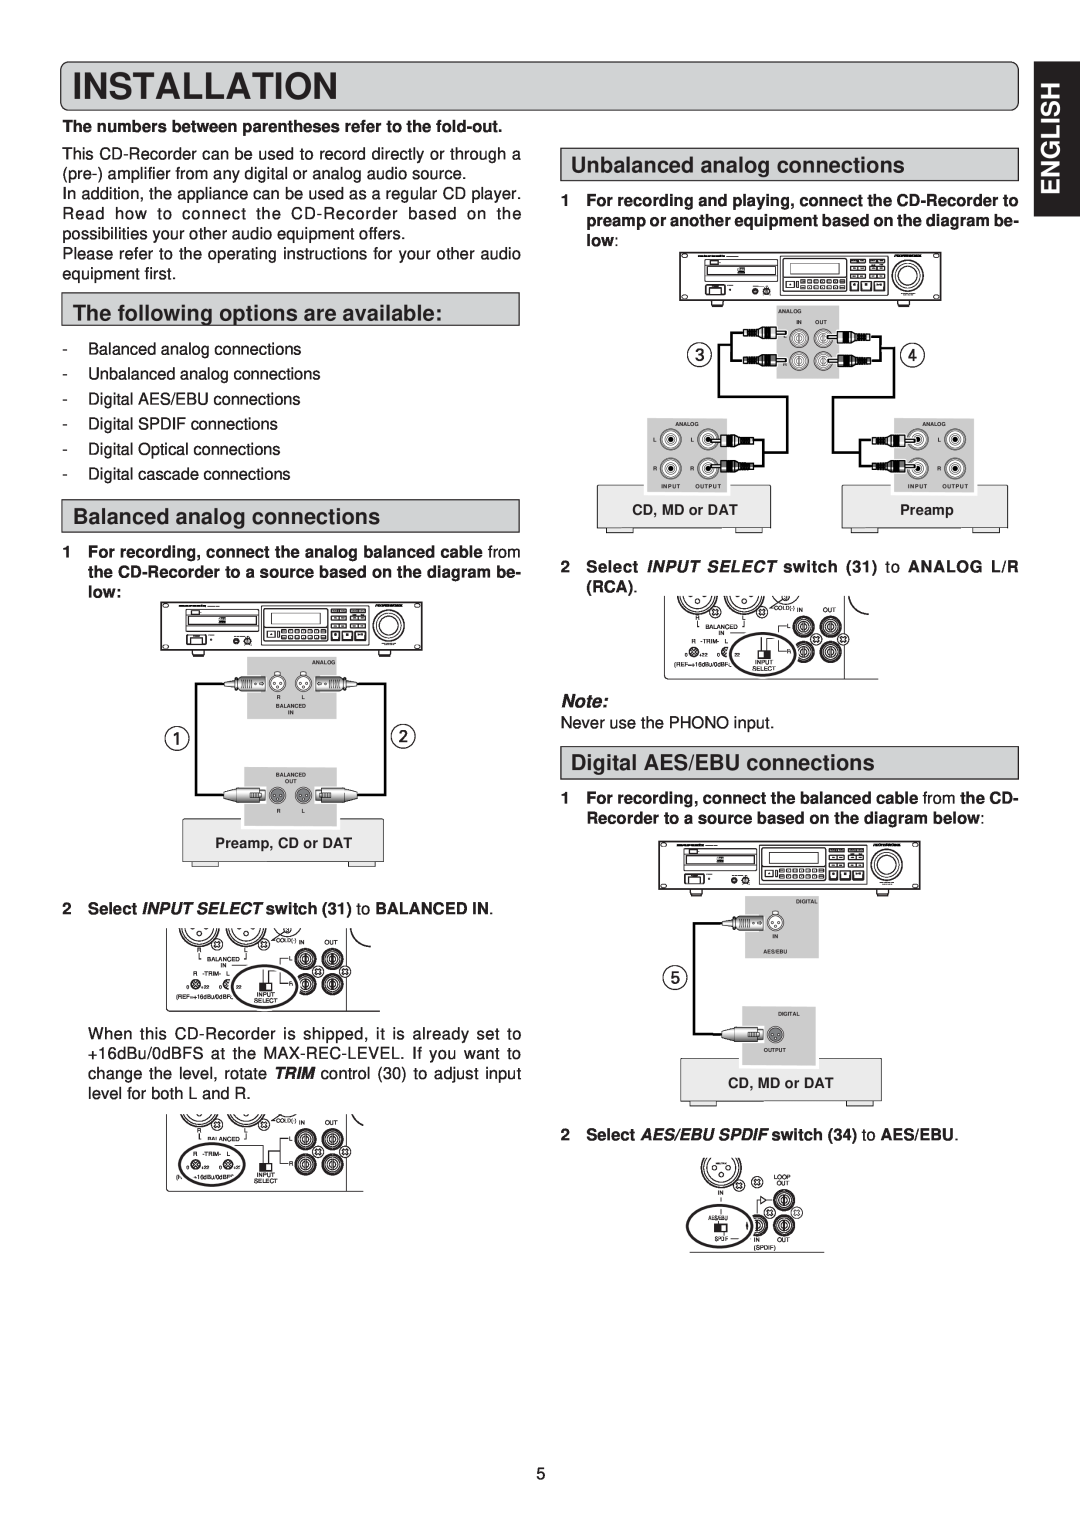 Marantz CDR631 Installation, The following options are available, Balanced analog connections, Digital AES/EBU connections 